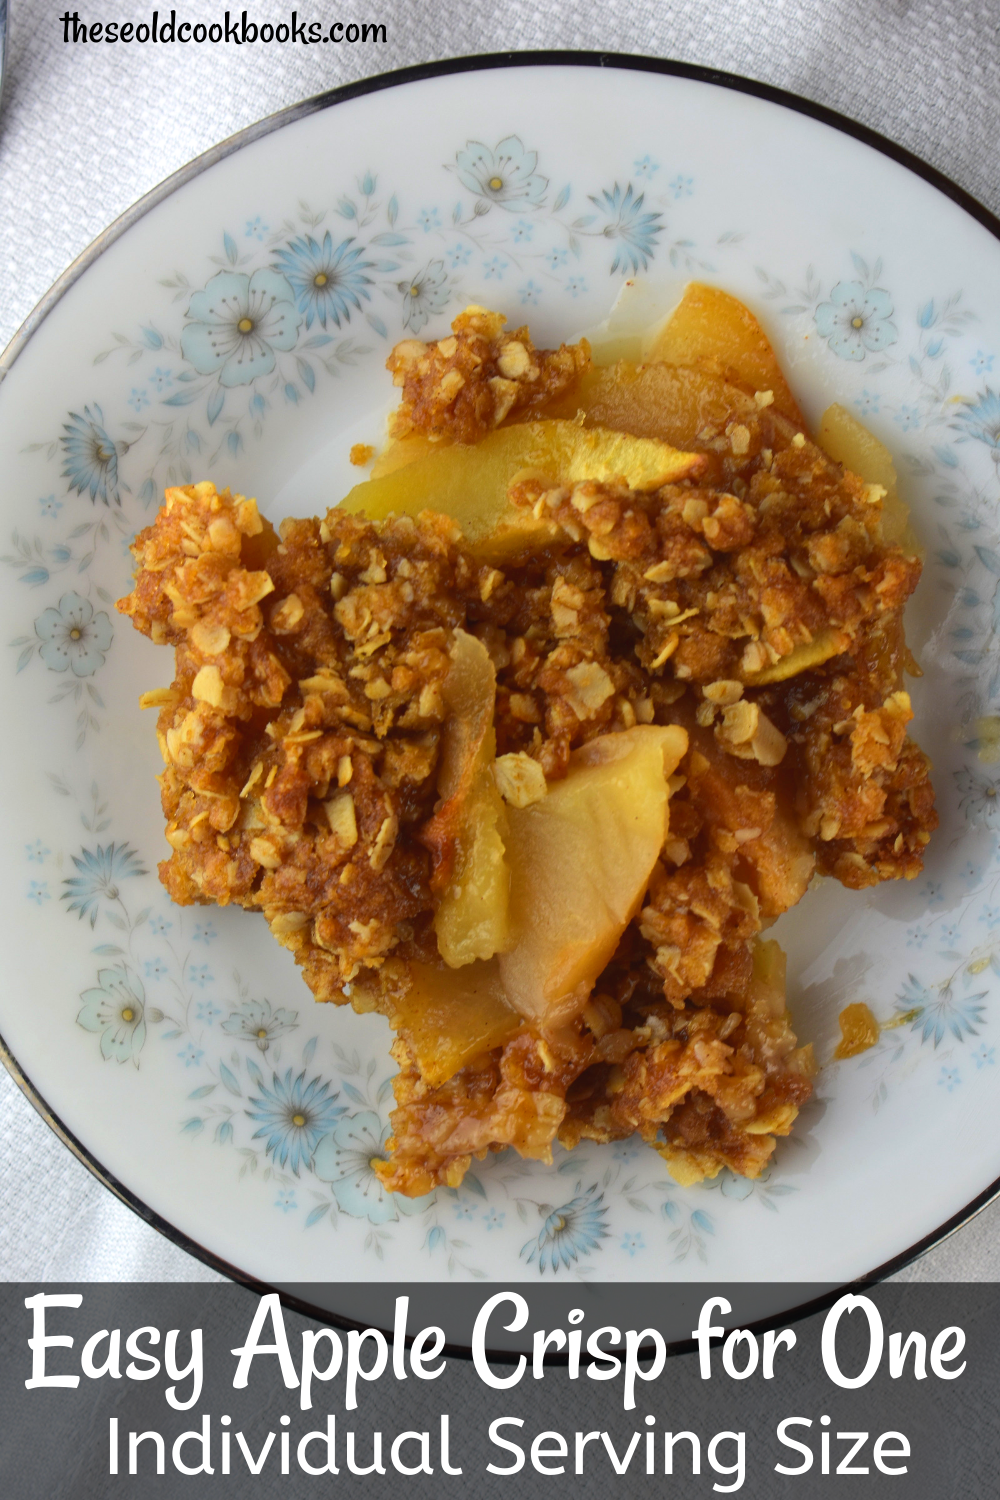 The Easiest Apple Crisp Recipe For One (With Recipe Instructions)